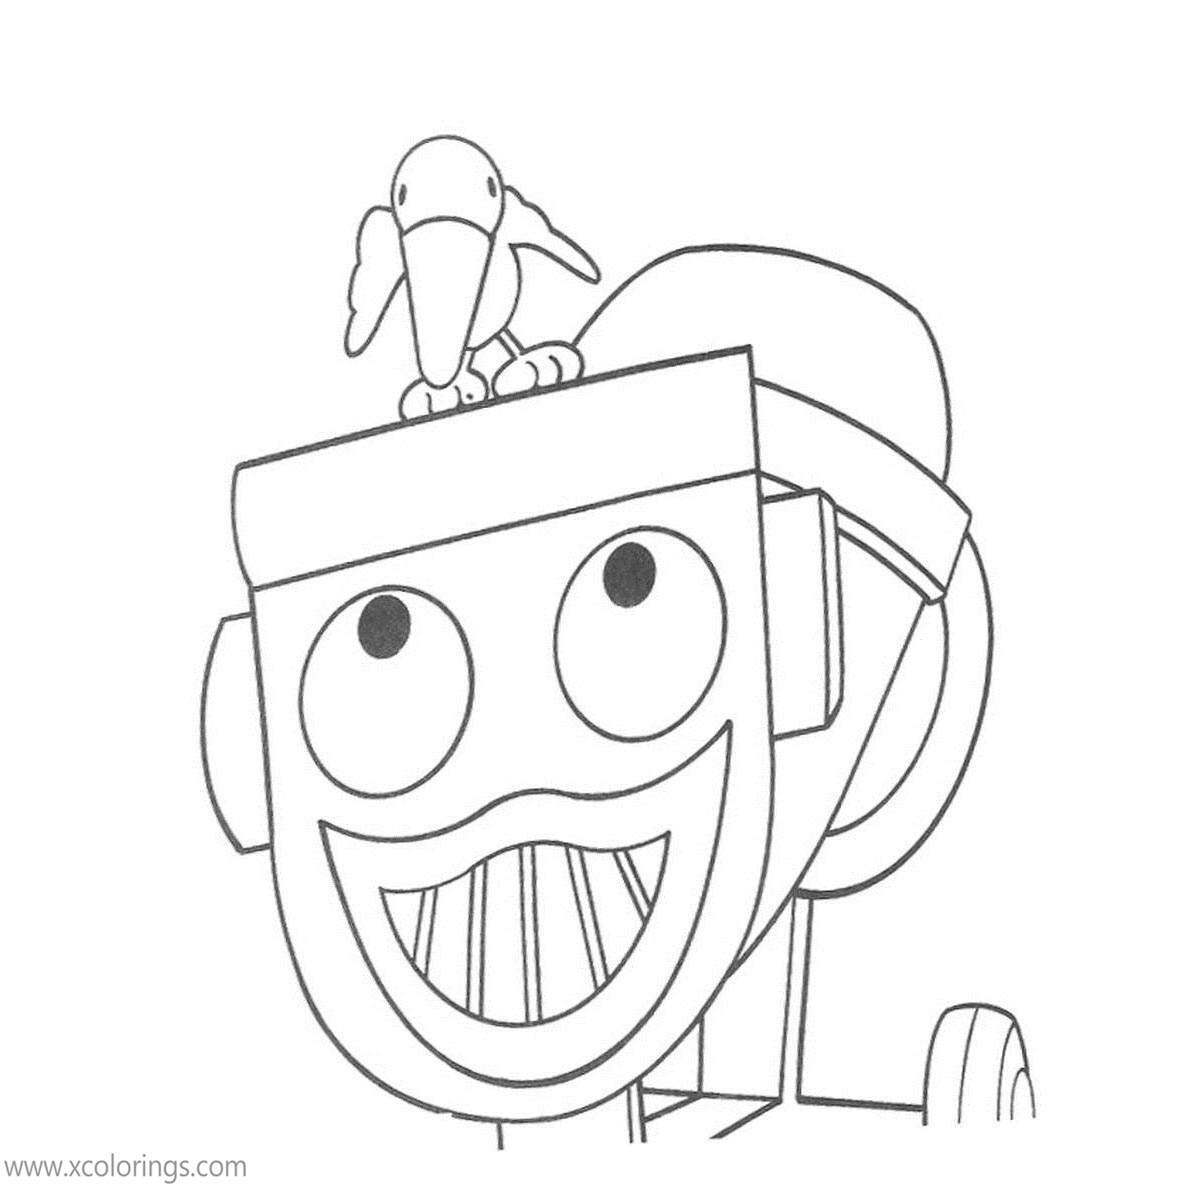 Free Bob the Builder Coloring Pages Bird is On the Head of Dizzy printable